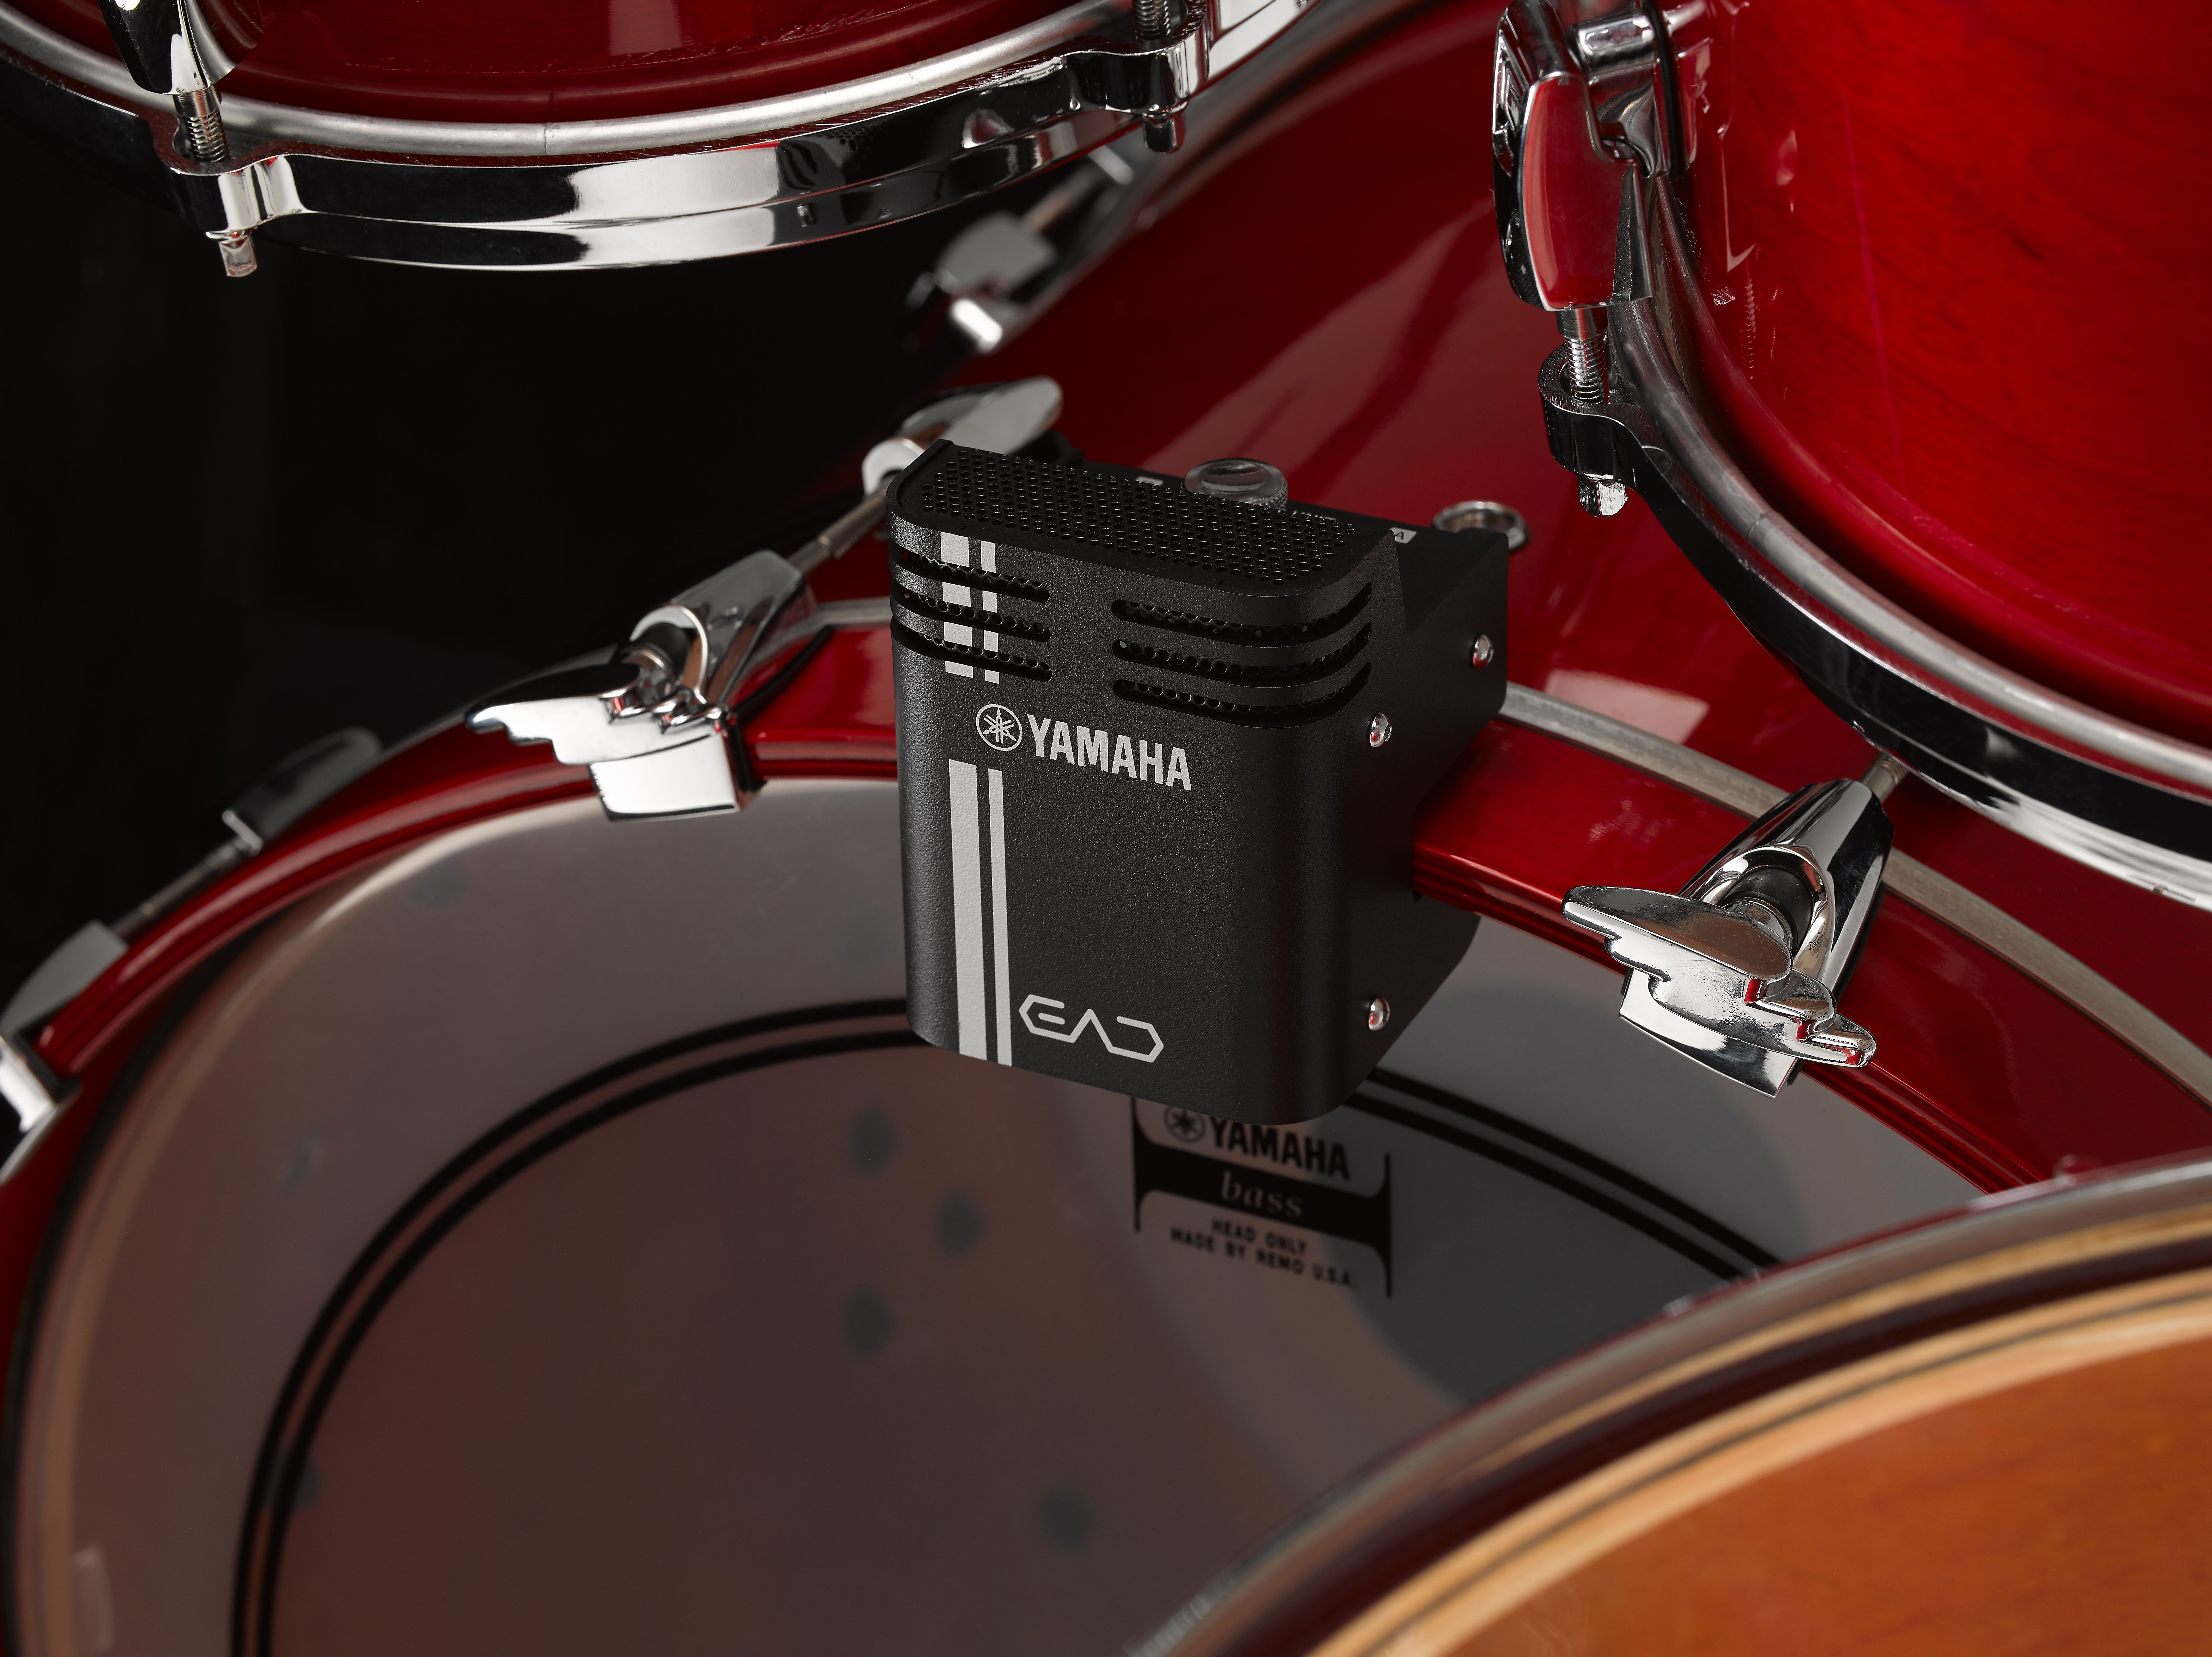 EAD10 - Specs - EAD - Electronic Acoustic Drum Module - Drums - Musical Instruments - Products - Yamaha - United States